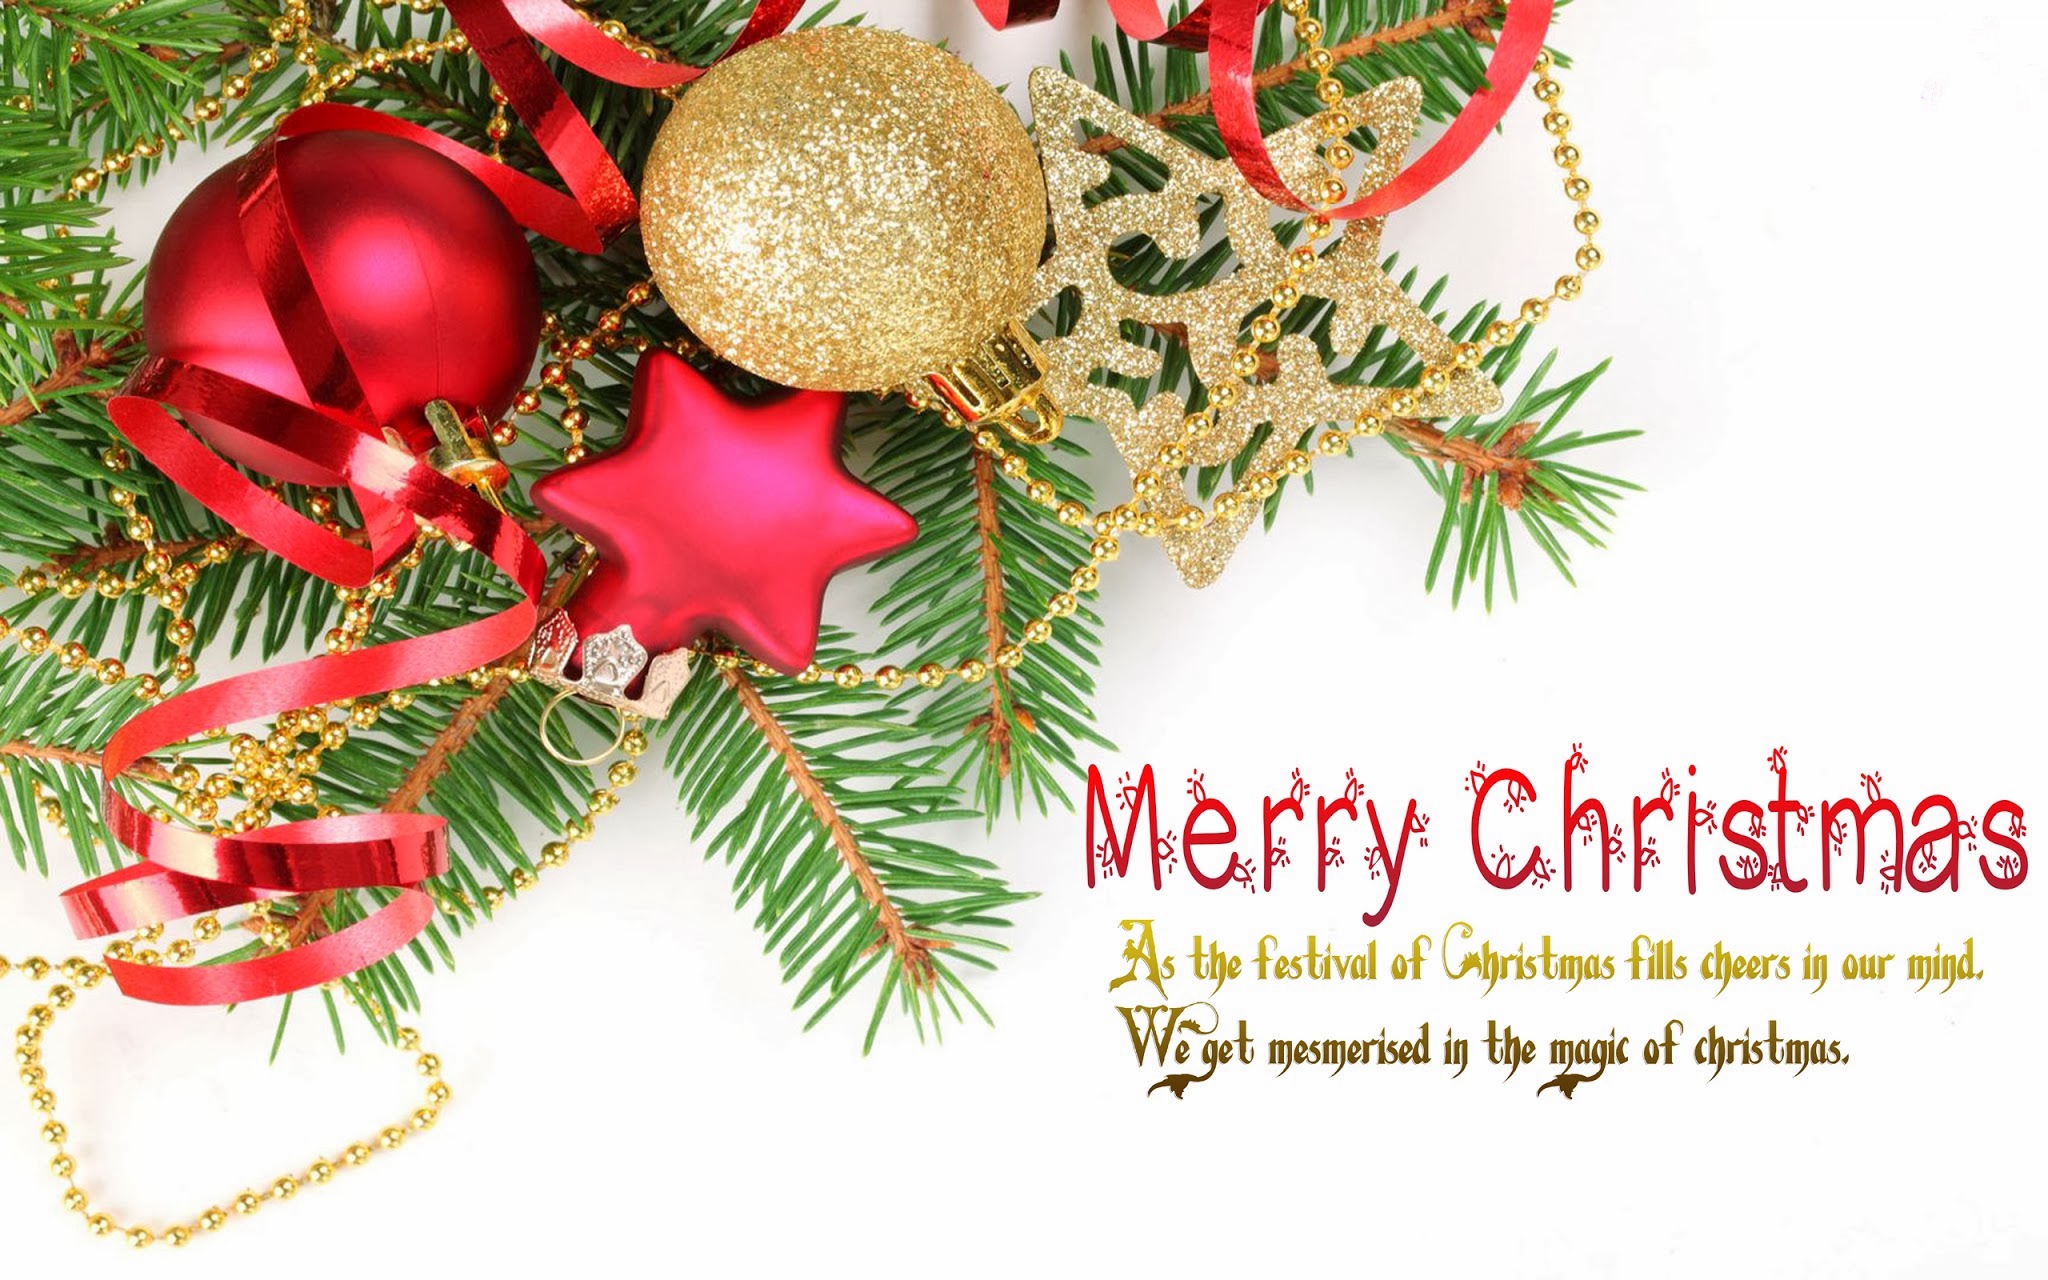 Love Christmas Greetings Text Messages" Ideal Christmas Greetings